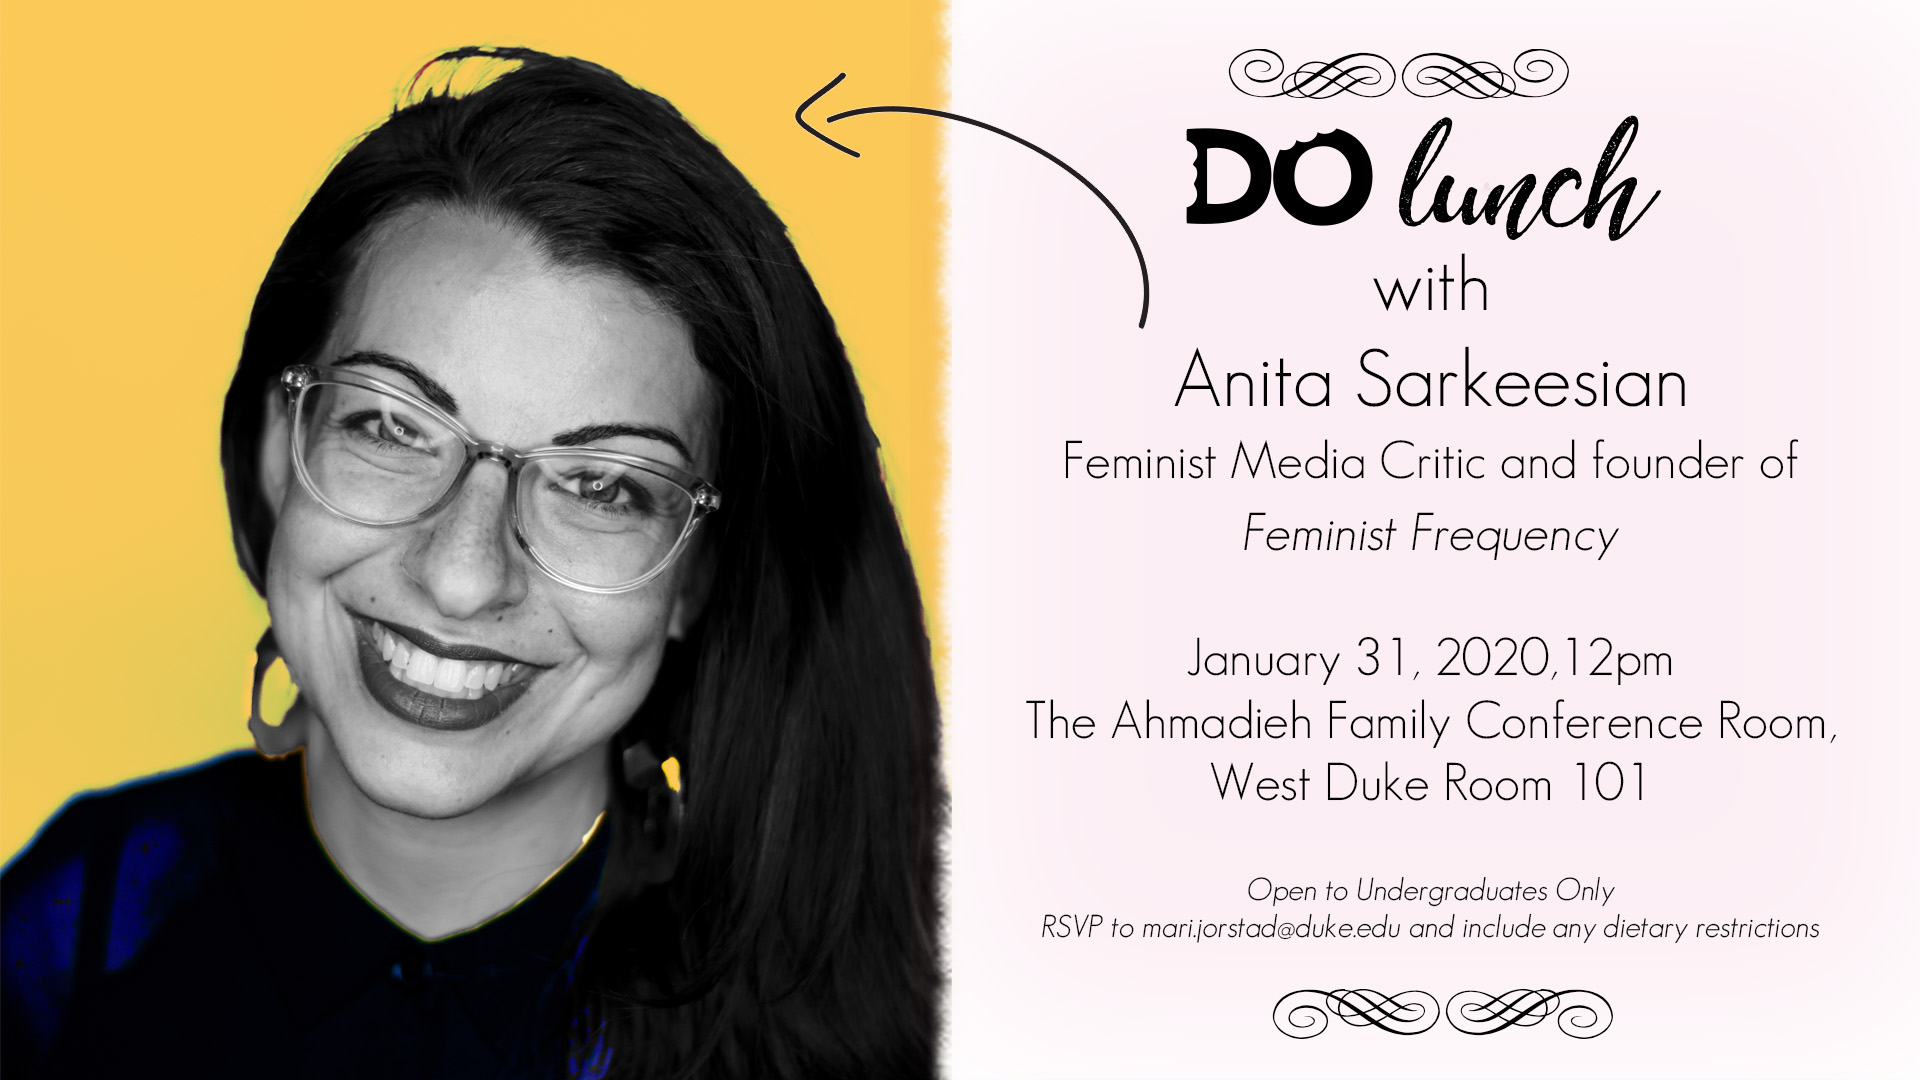 Do lunch with Anita Sarkeesian.. all info below